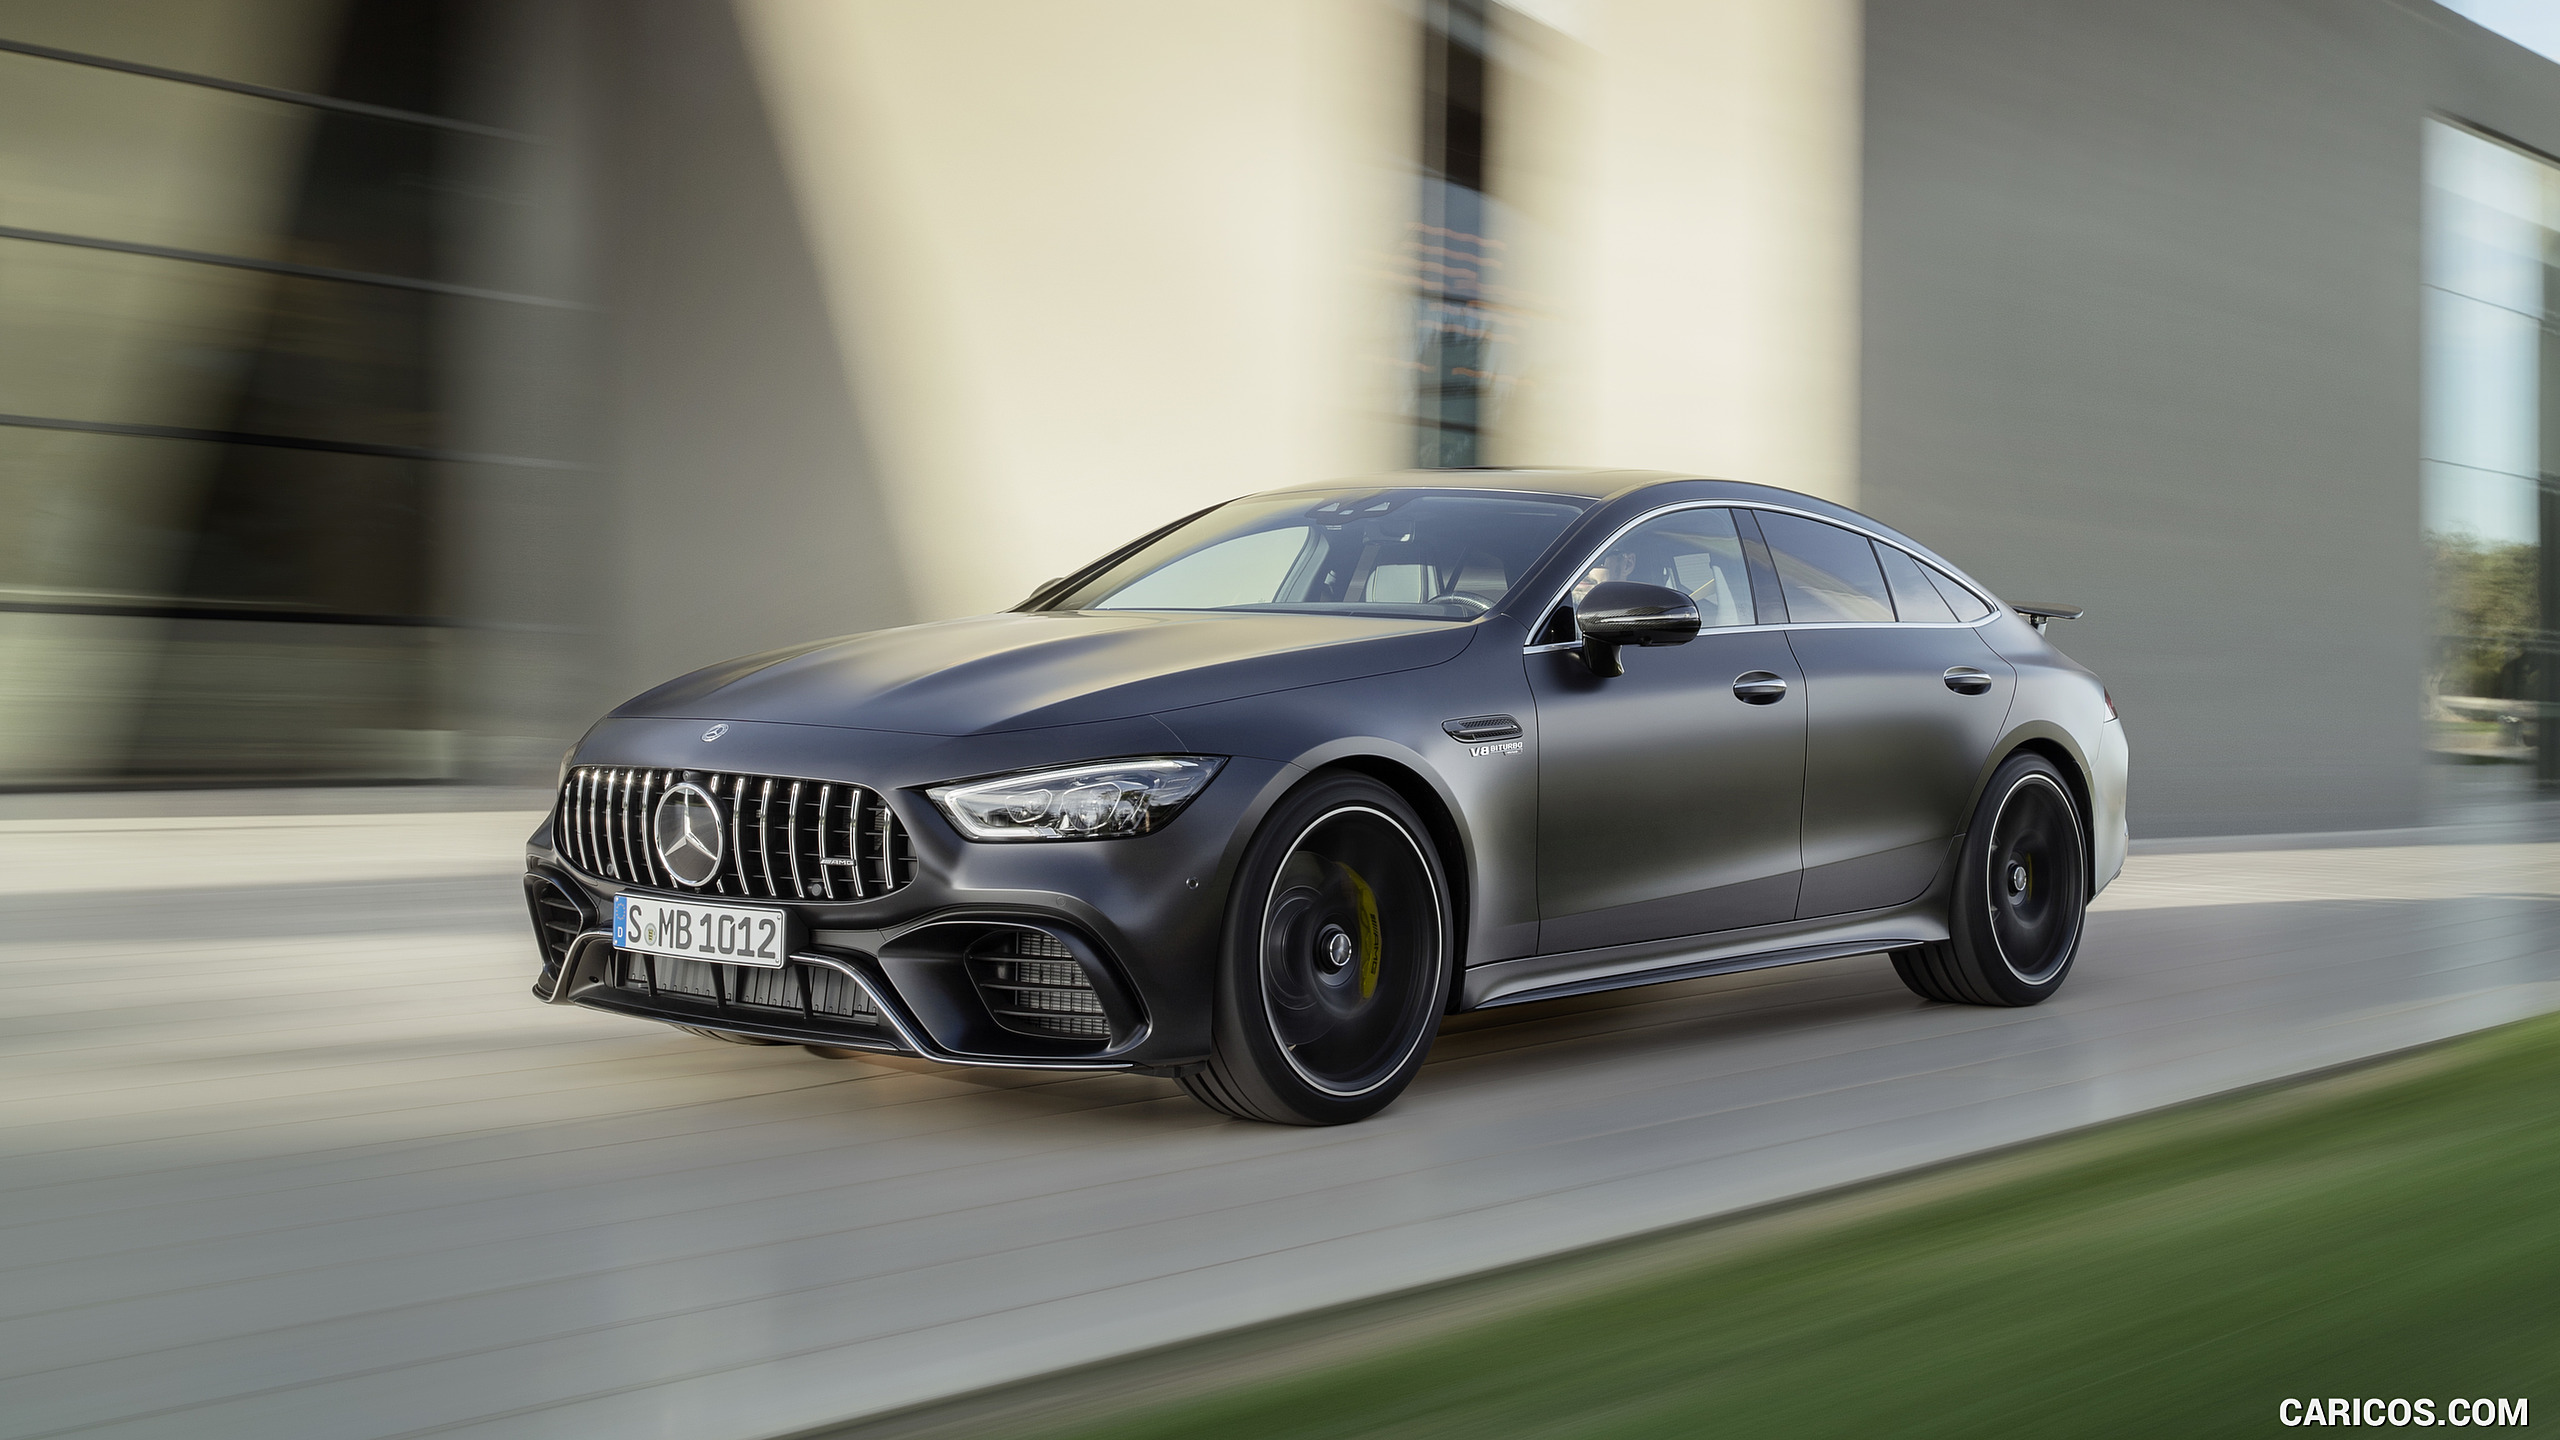 Gt 63. Mercedes Benz AMG gt 63. Мерседес AMG gt 63s. Mercedes AMG gt 63 s. Mercedes AMG gt 63s 4 Door.